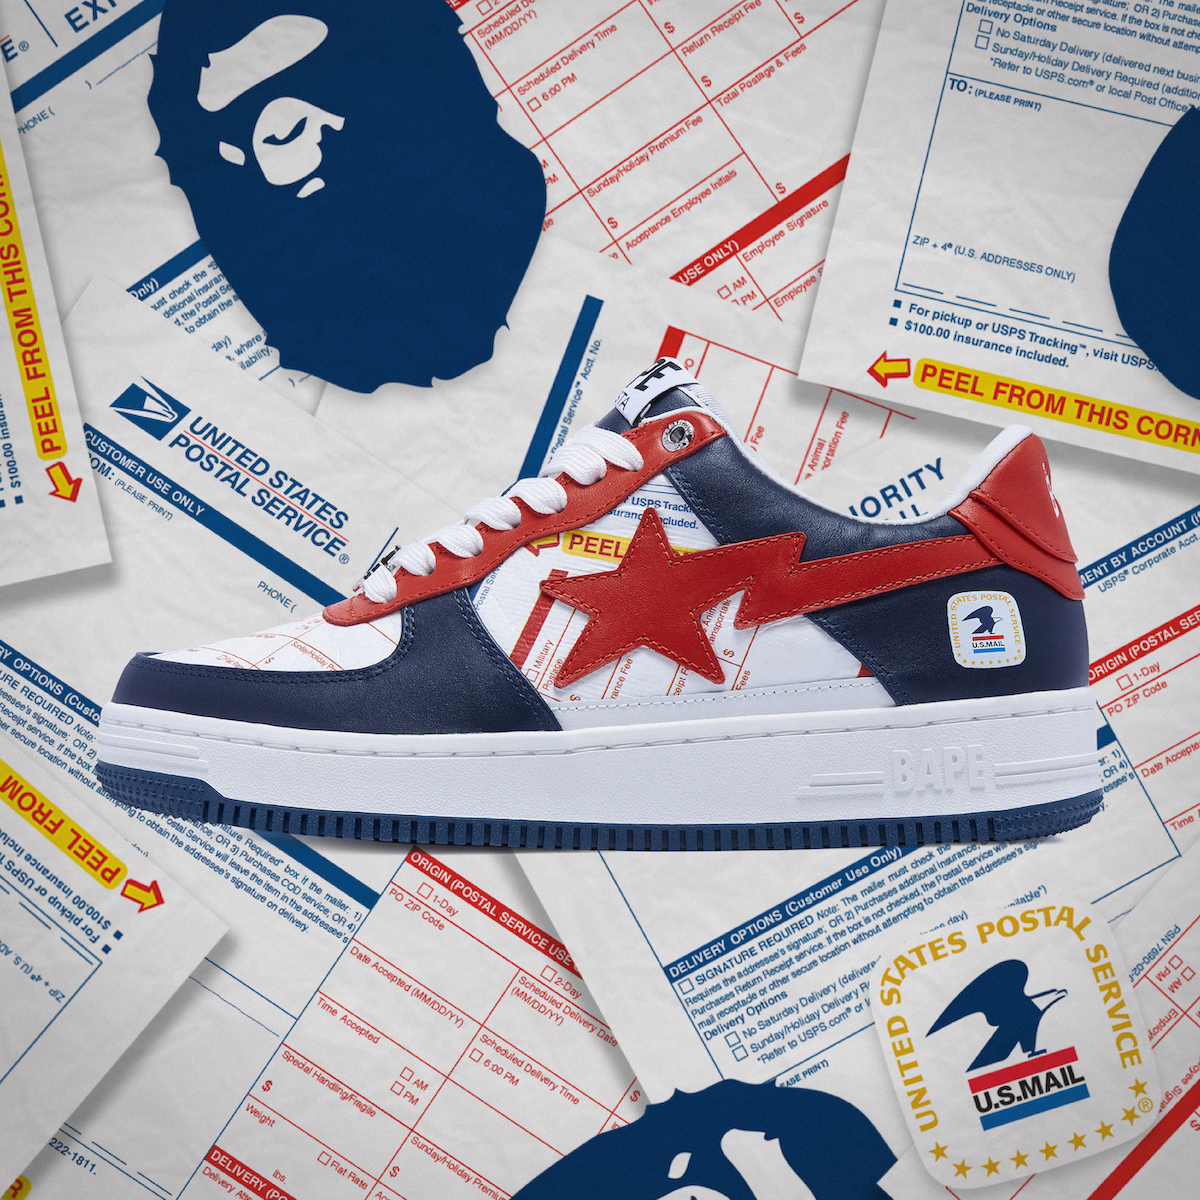 BAPE Team Up With United States Postal Service for Footwear & Apparel Capsule